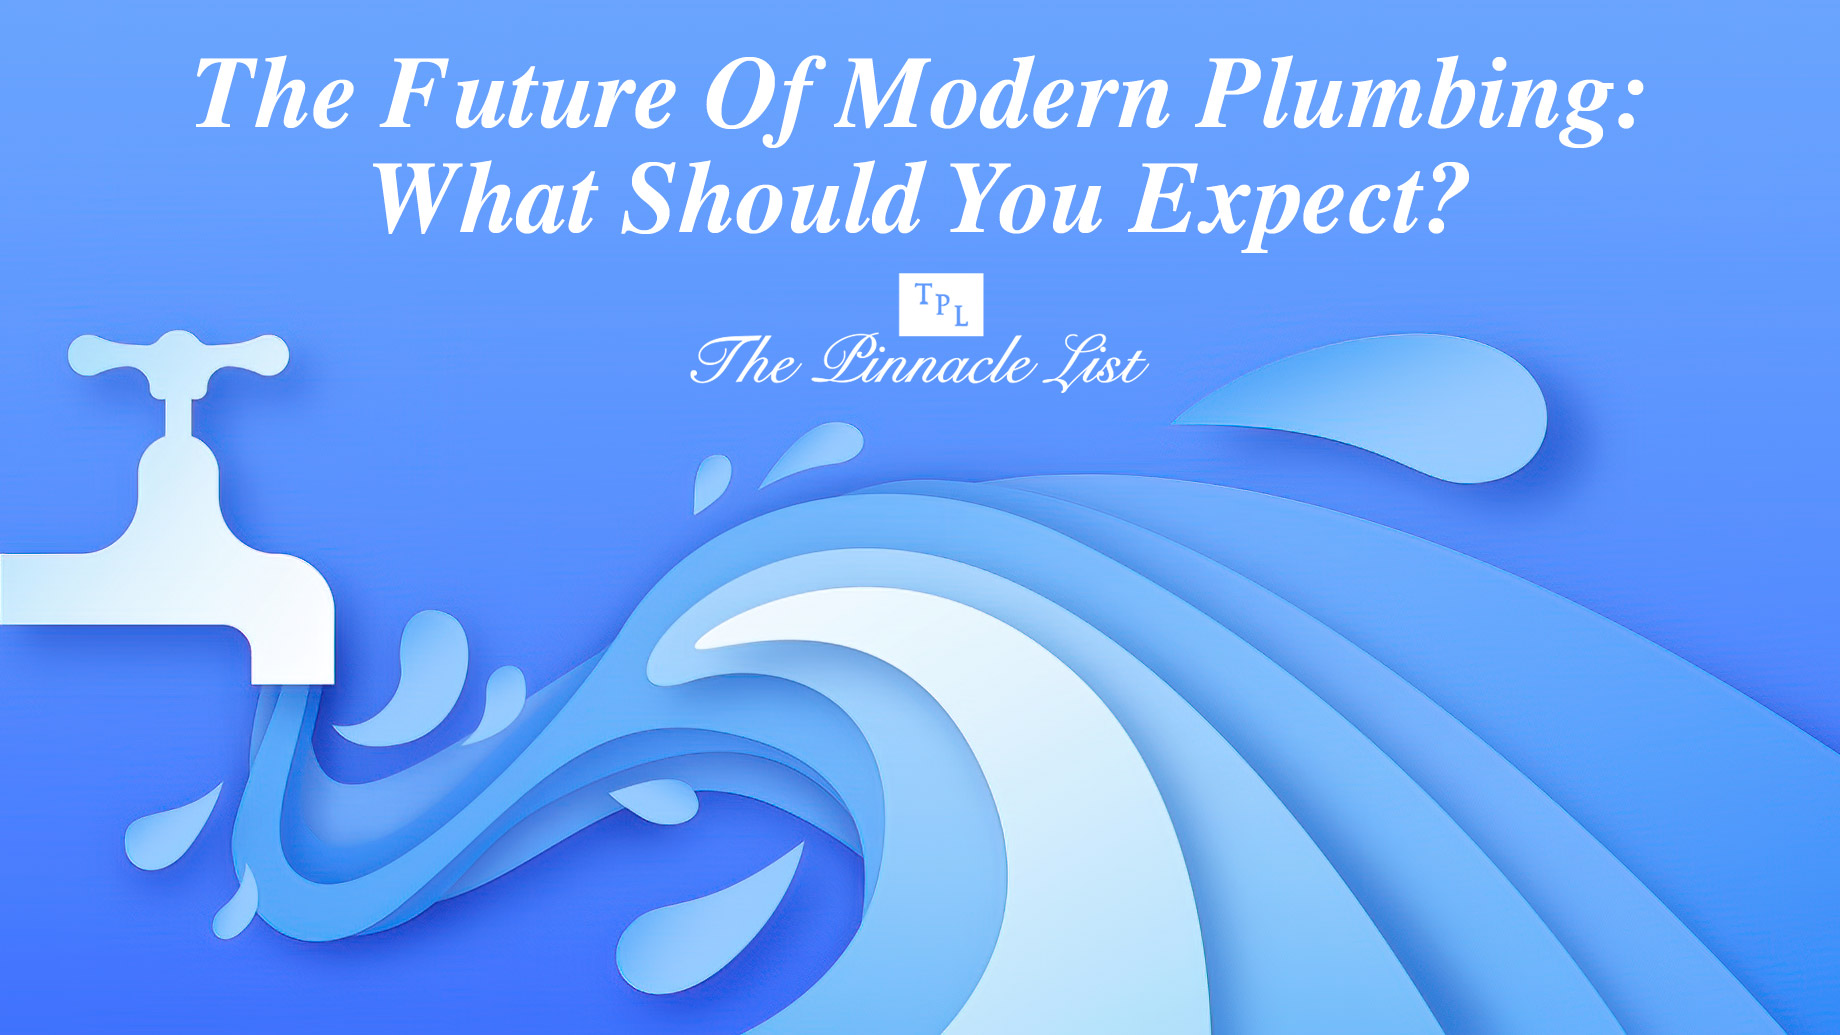 The Future Of Modern Plumbing: What Should You Expect?